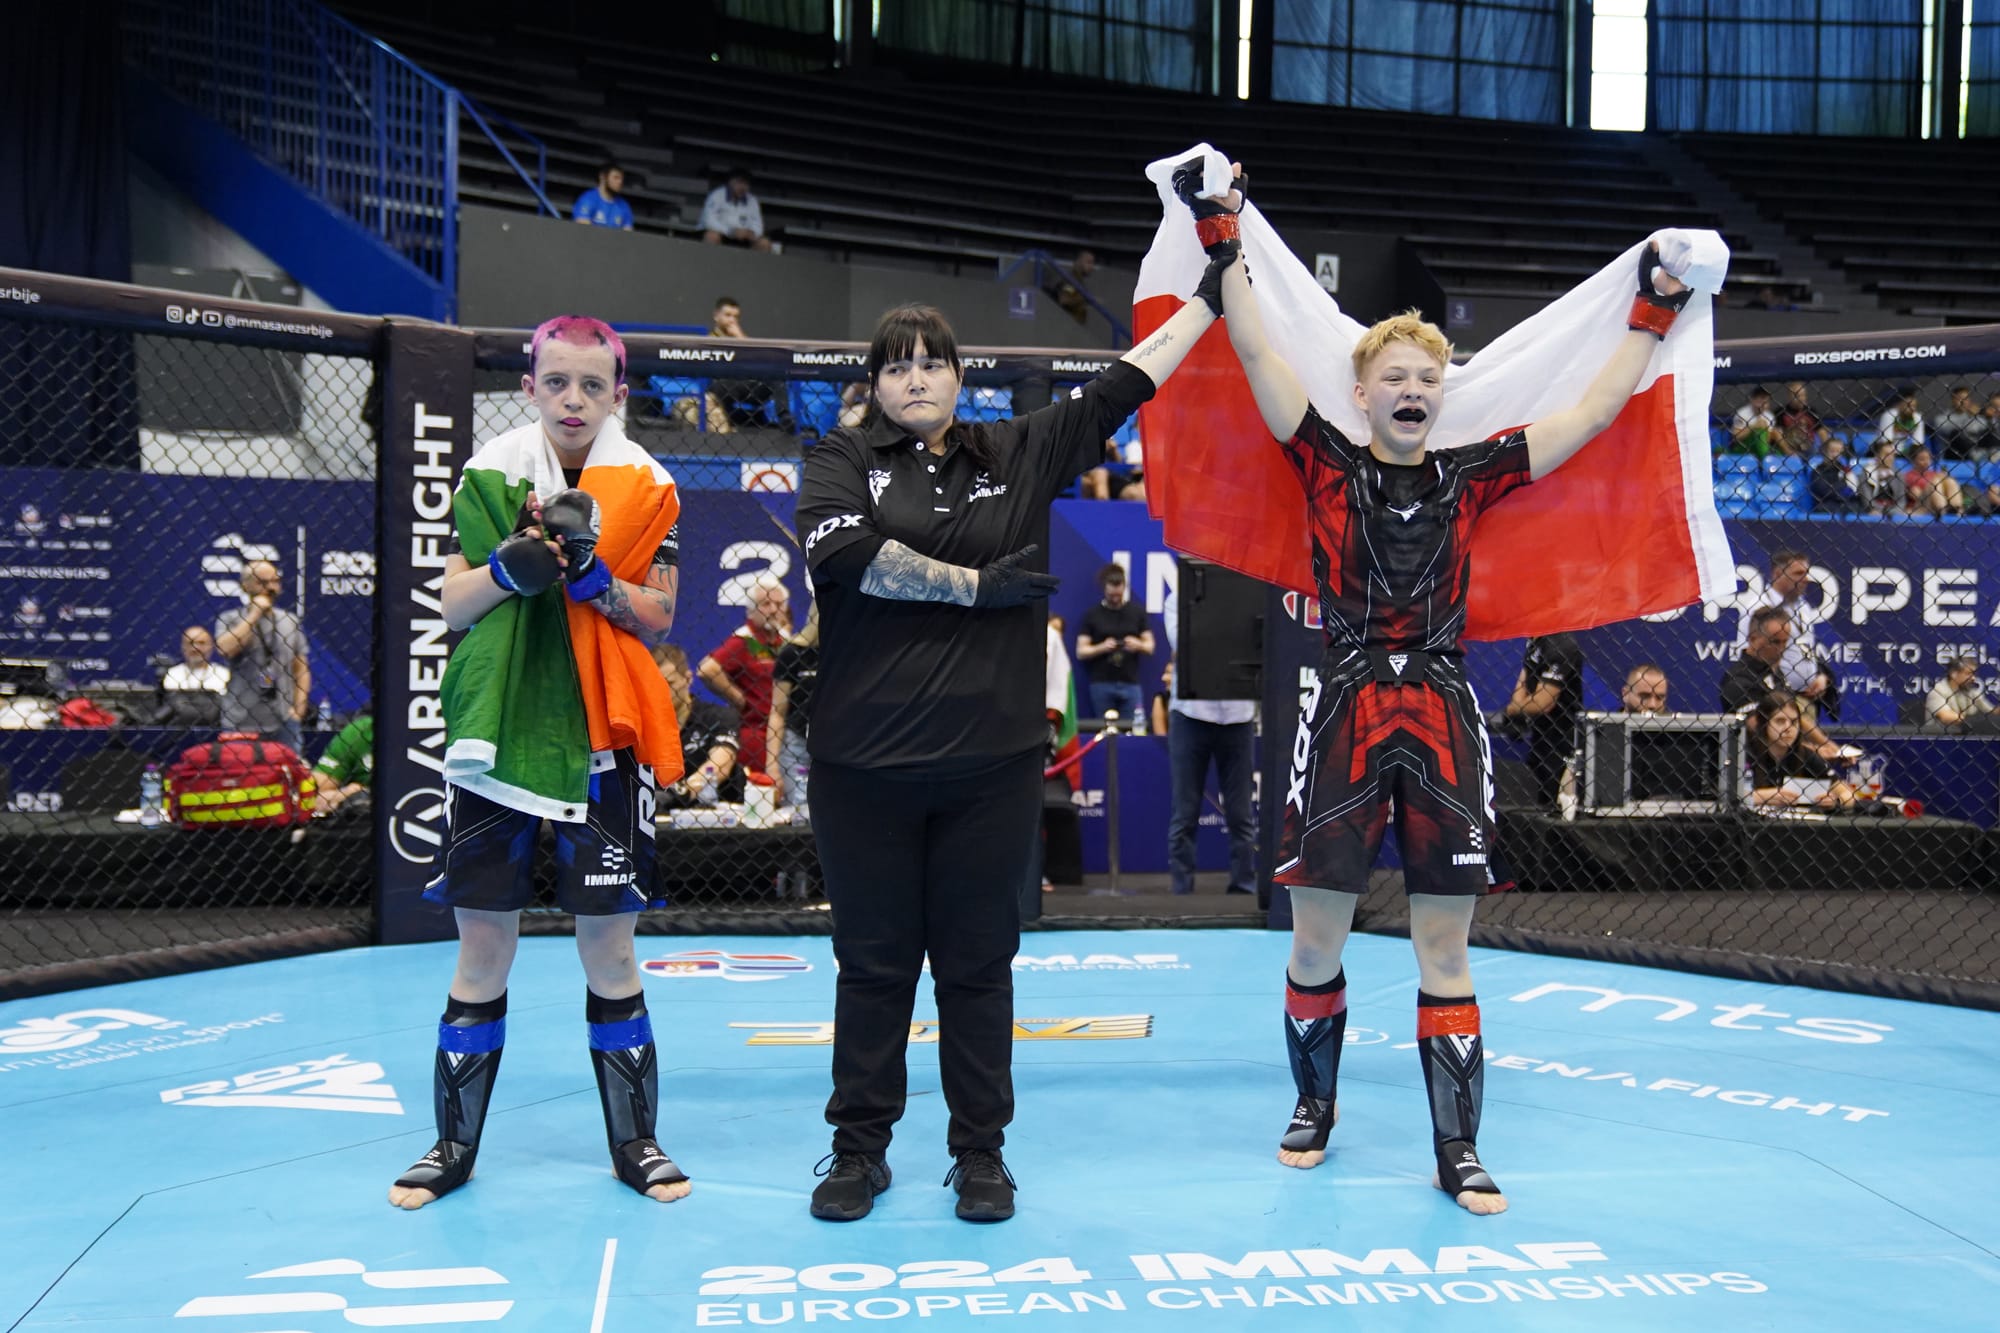 IMMAF European Championships Day 3 of Juniors and Seniors: upsets drive France and Poland forward